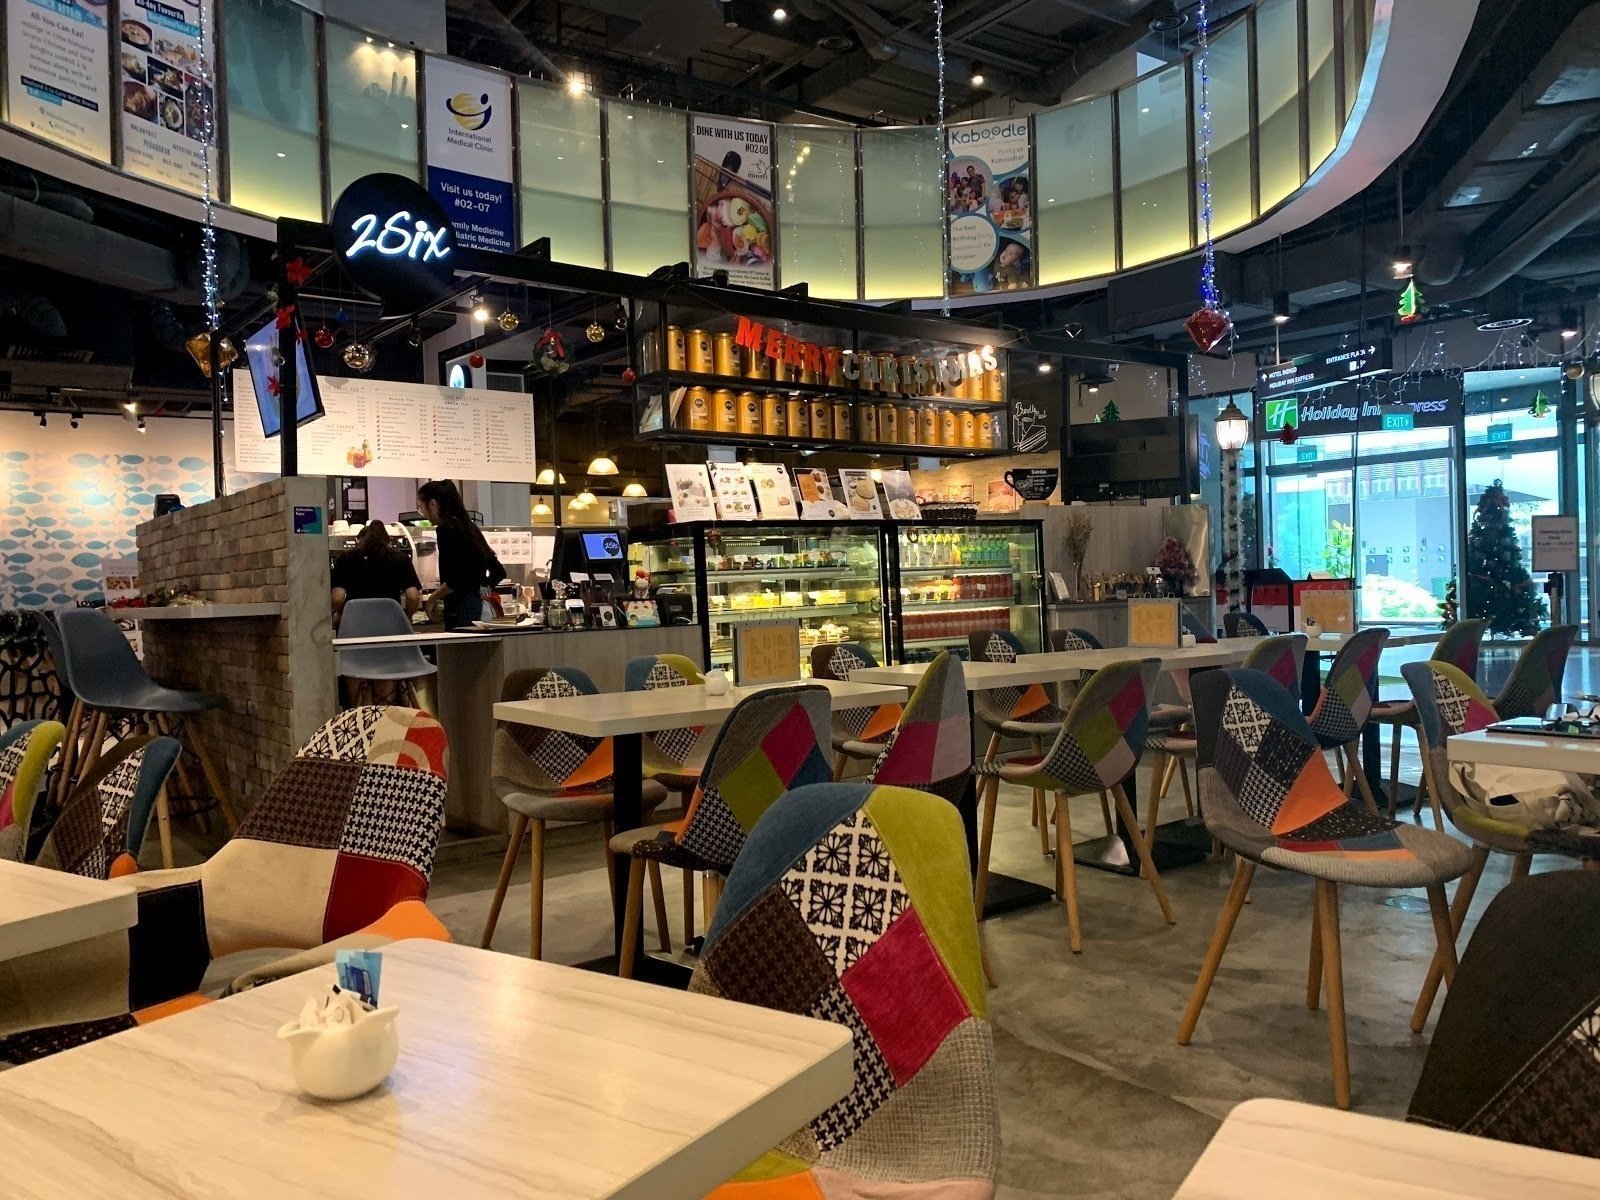 <span class="translation_missing" title="translation missing: en.meta.location_title, location_name: 2Six Cafe, city: Singapore">Location Title</span>